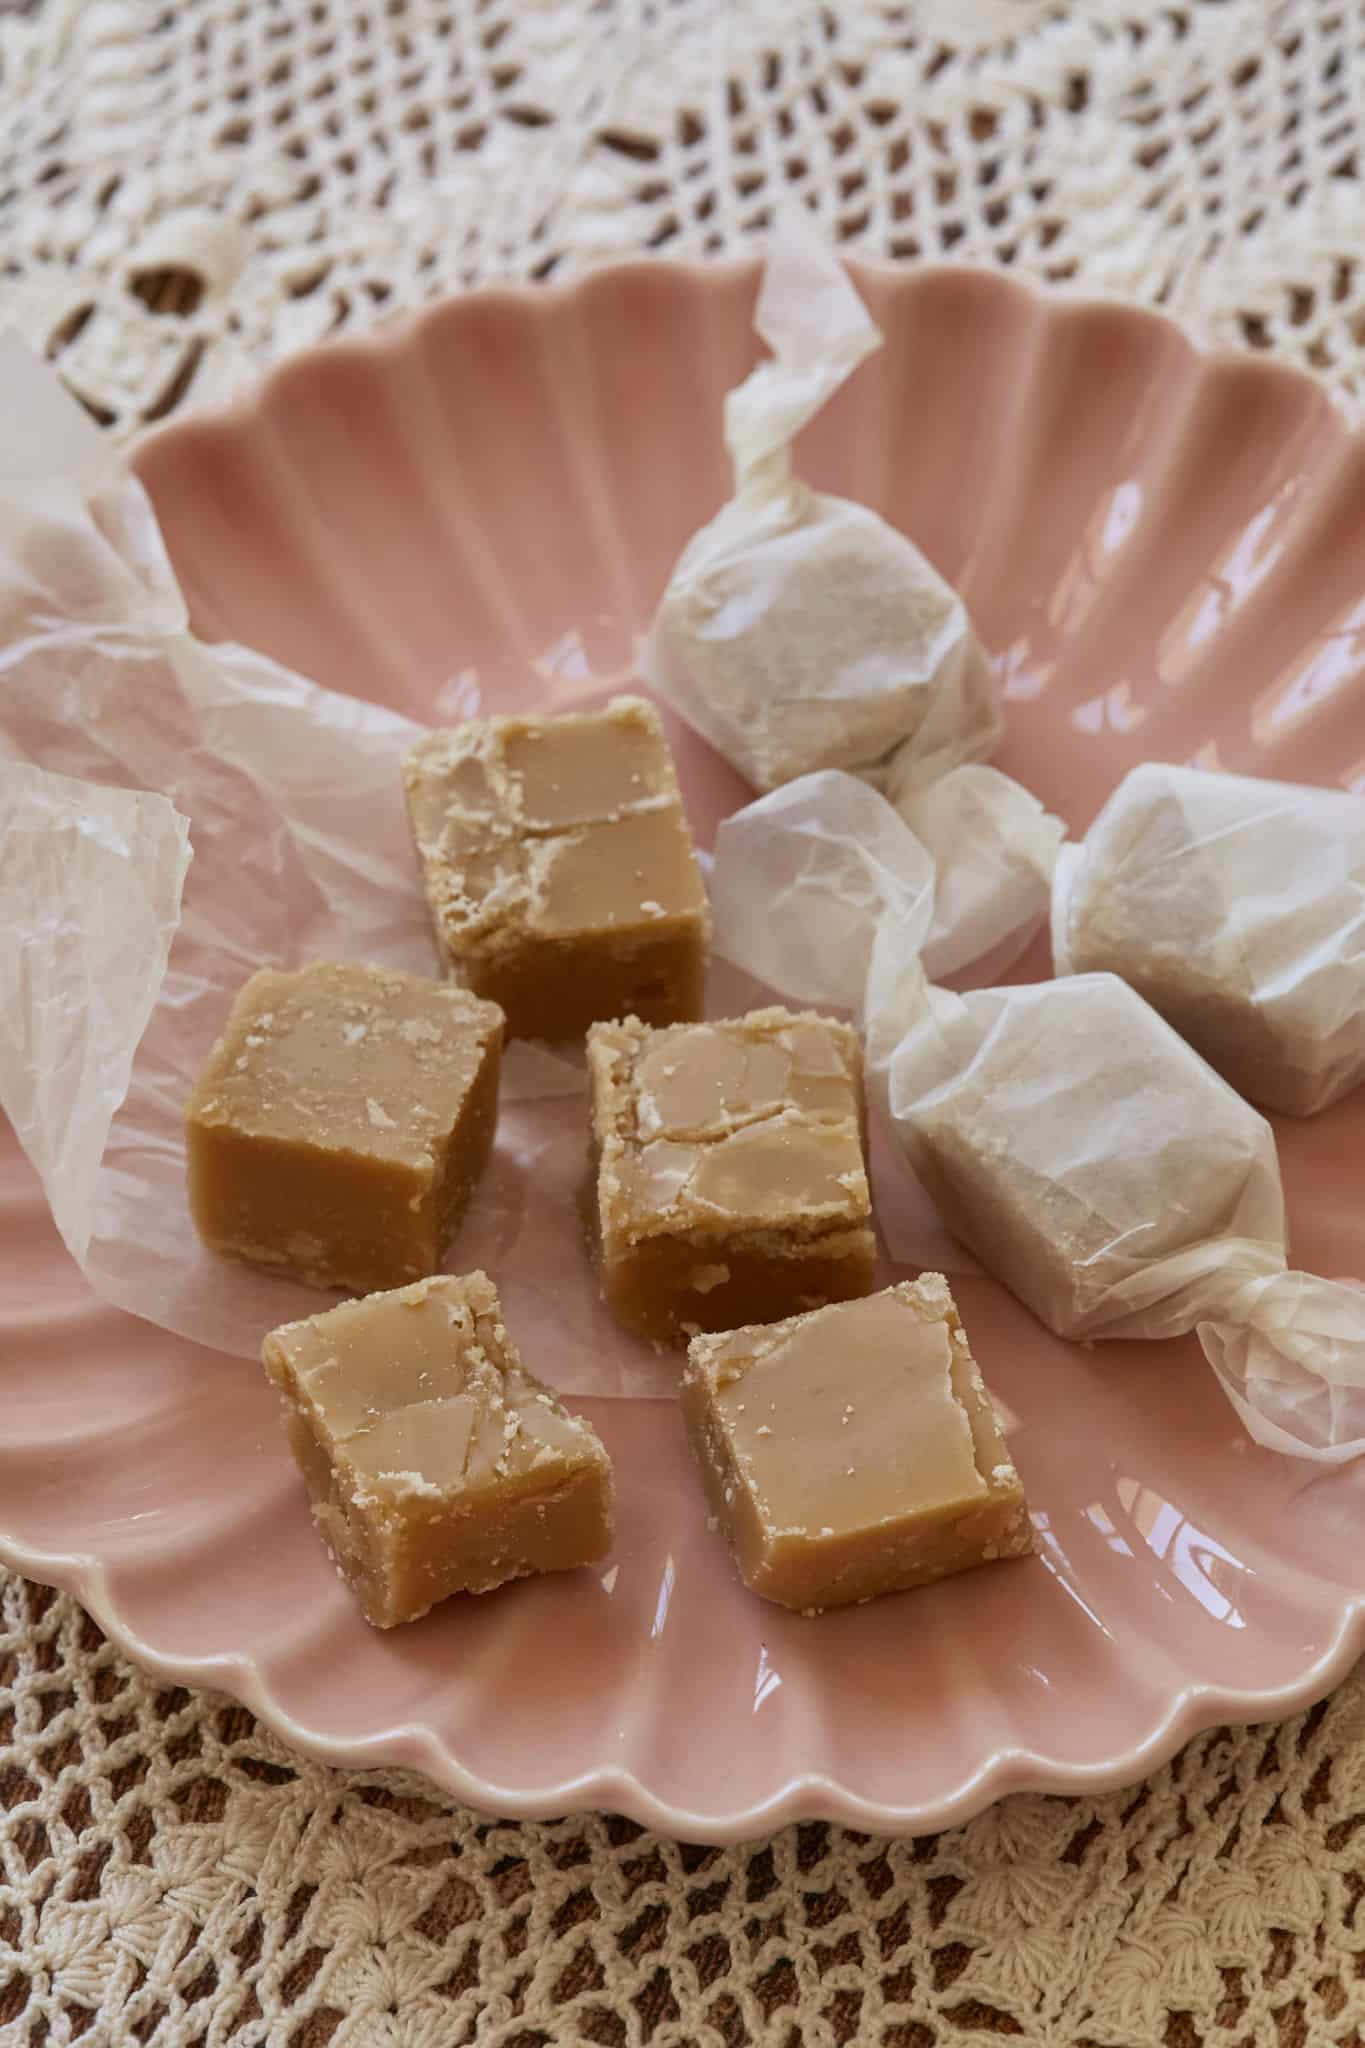 Square homemade candy made with maple syrup are served on a pink dish. The homemade candy is wrapped in parchment paper